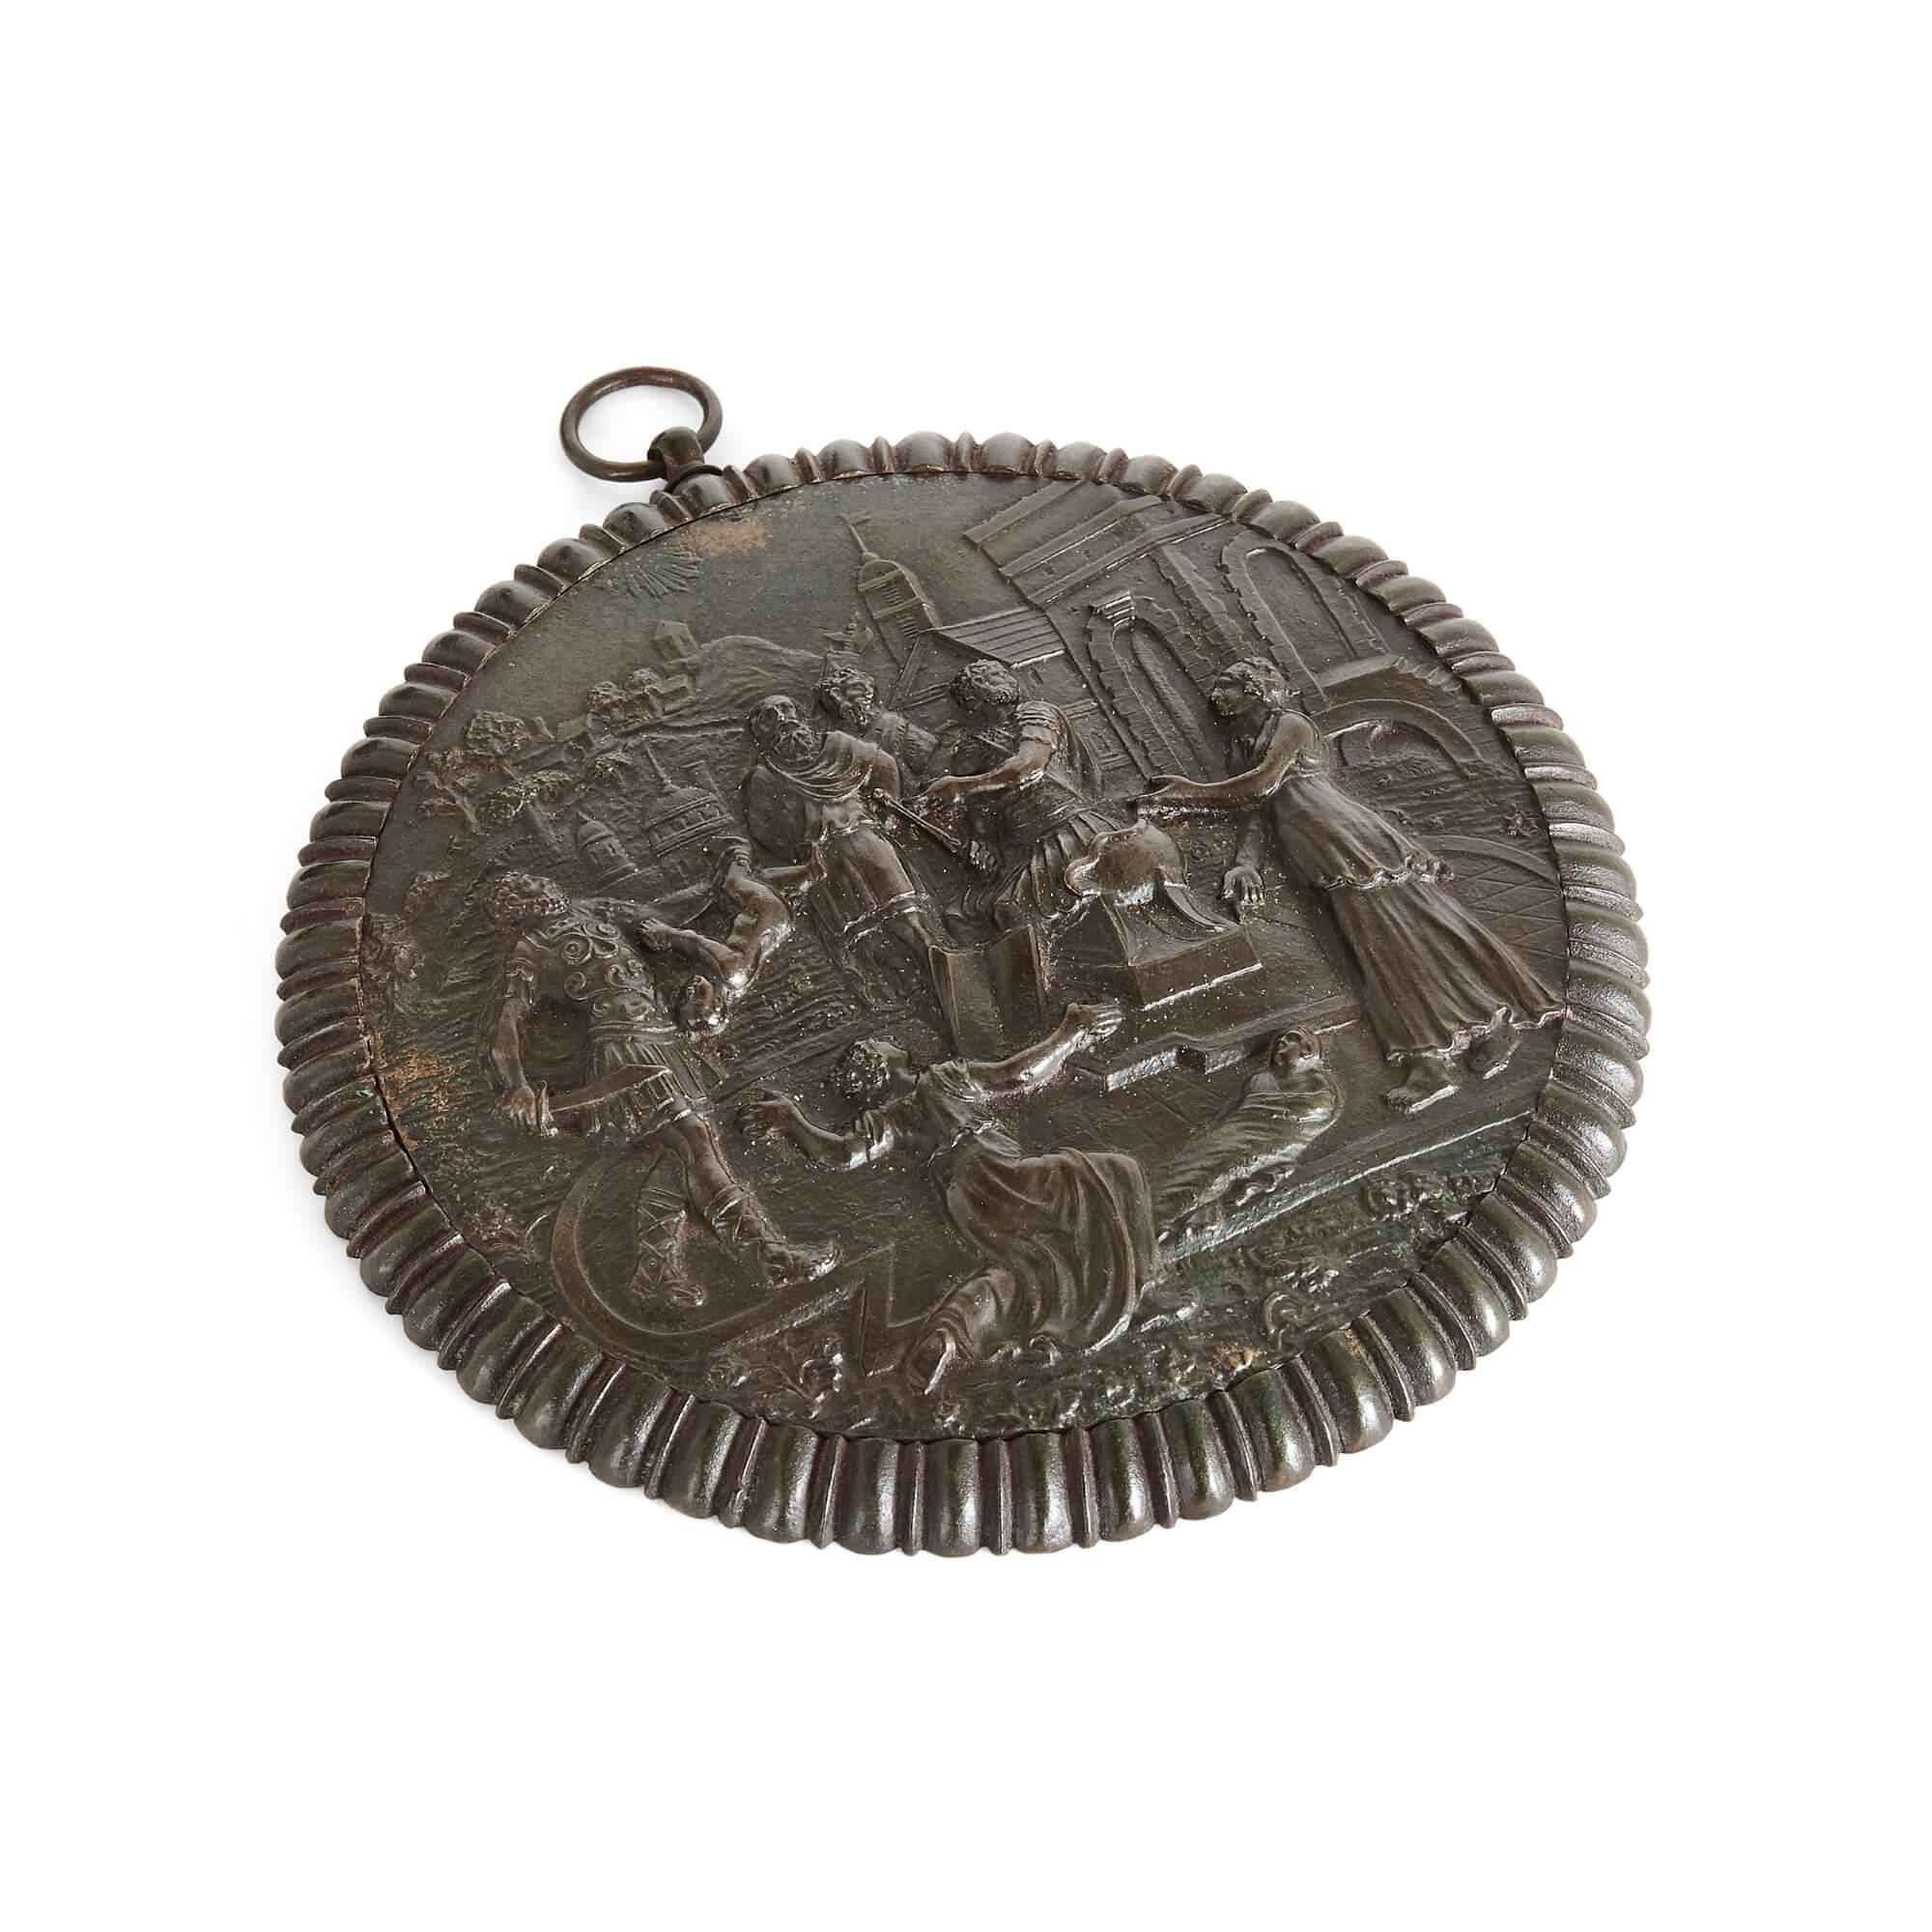 19th Century patinated bronze plaque of the Judgement of Solomon
French, 19th Century
Diameter 16cm, depth 1.5cm

The circular front of this lustrous patinated bronze plaque is decorated with a relief of the Judgement of Solomon. The scene is